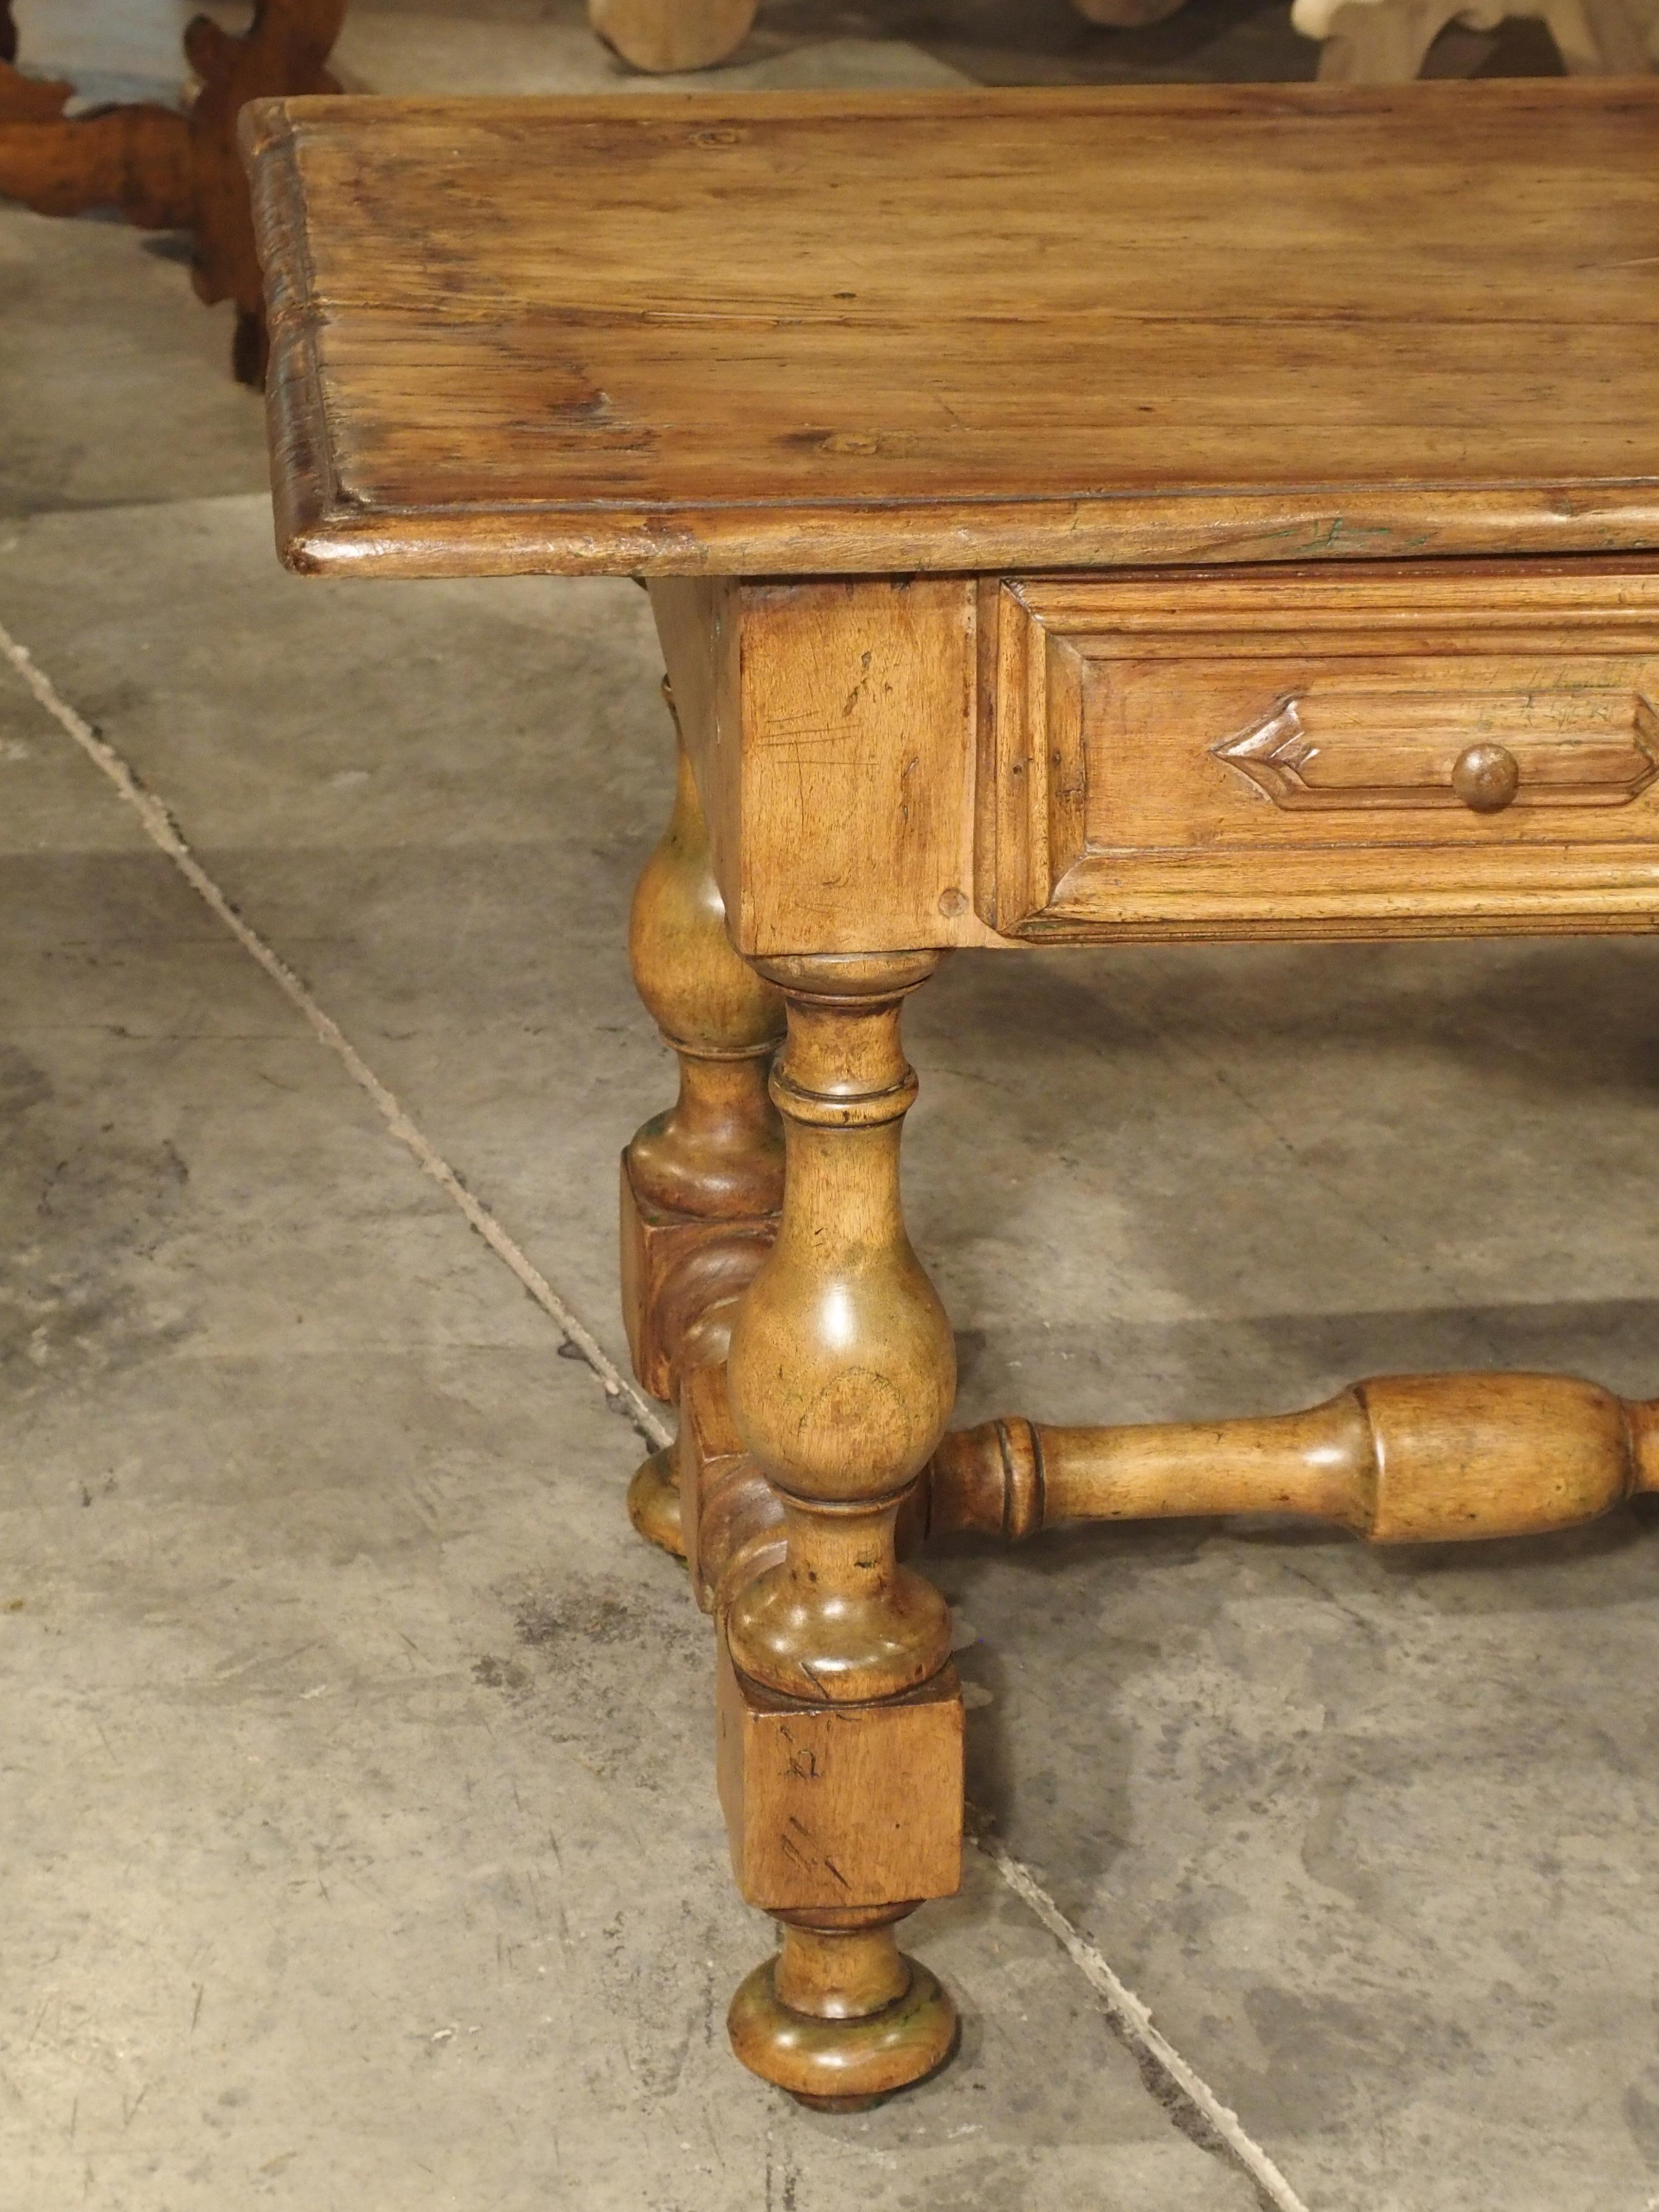 This small table comes from the present day area of Southwestern France and Northern Spain, also known as the Basque country. Due to its size and drawers present on the front, we can consider it a writing table.

Though the table has evidence of